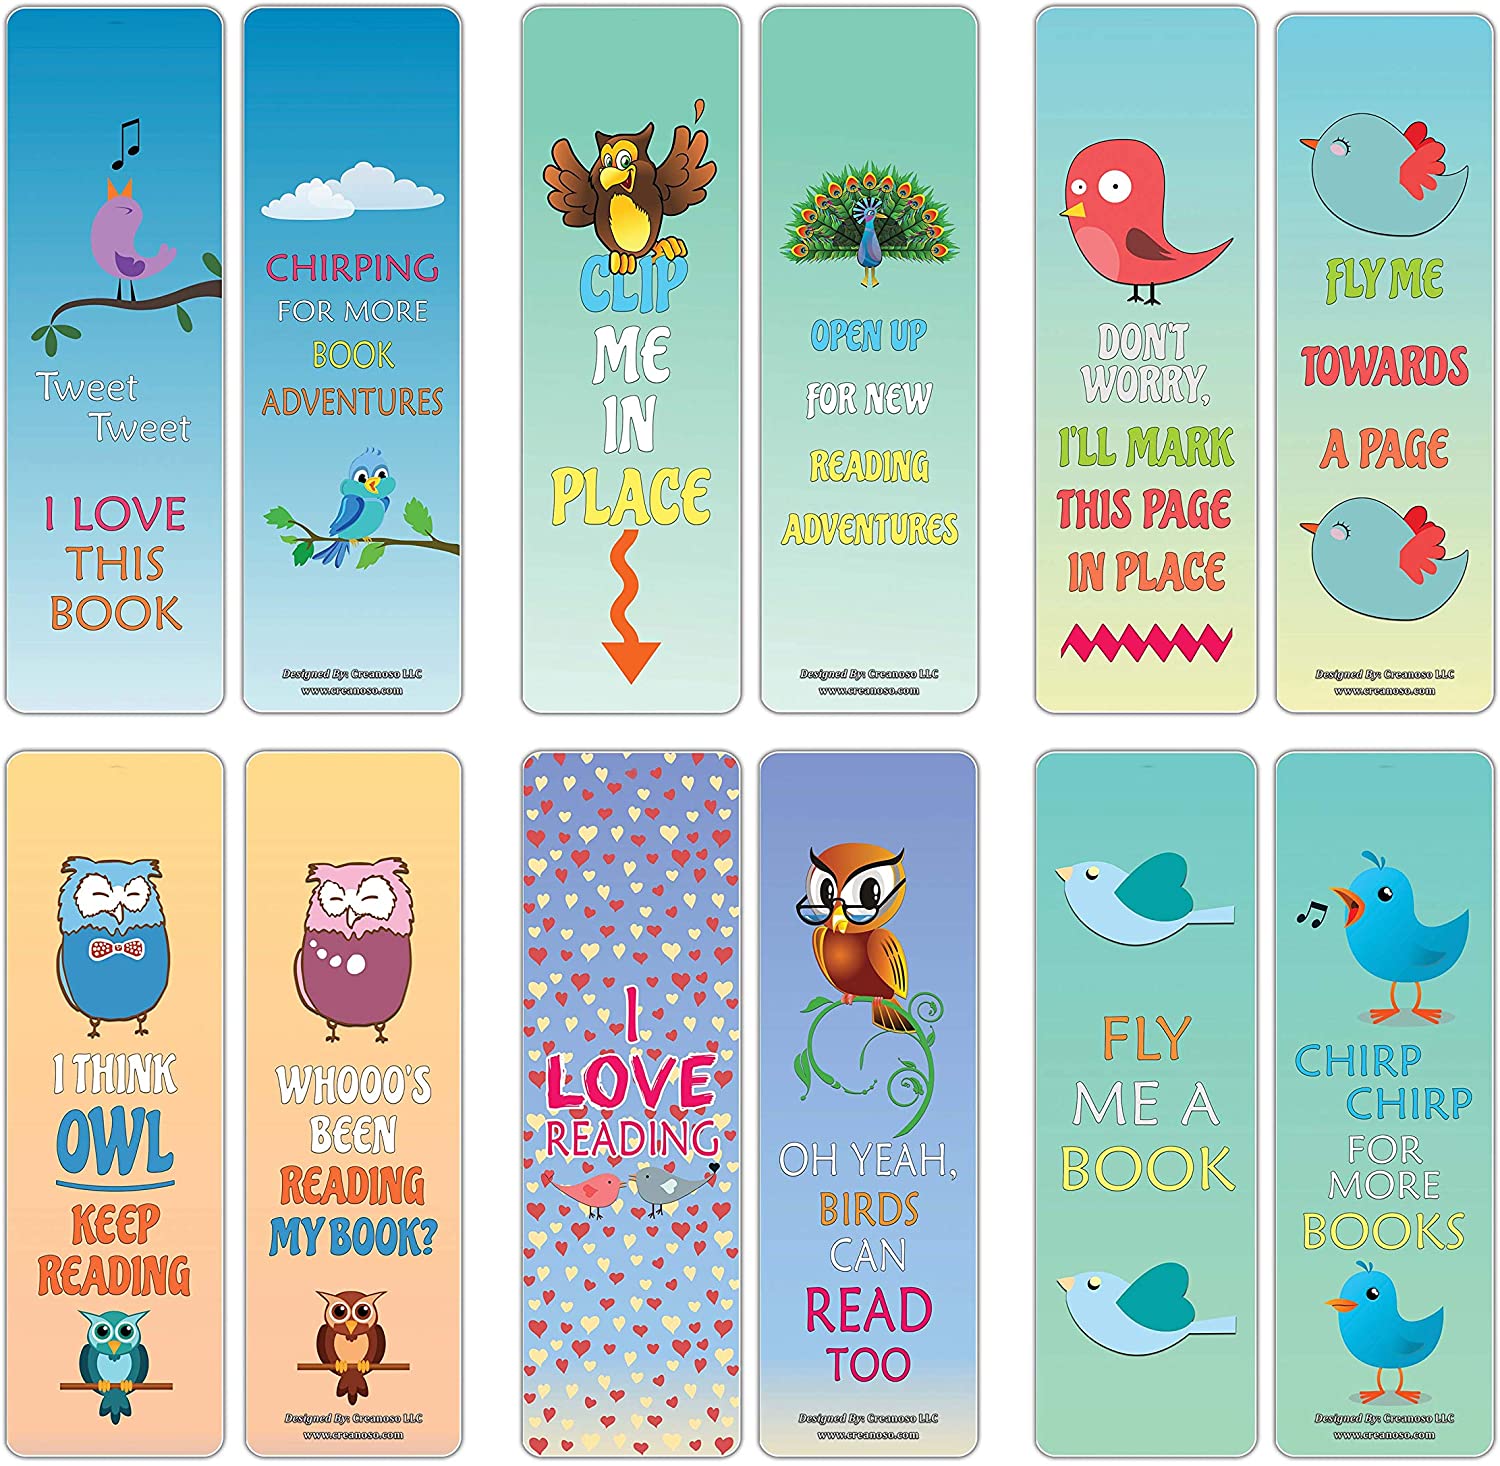 Creanoso Inspiring Book Readers Bird Bookmarks (30-Pack) - Stocking Stuffers Gift for Bibliophiles, Book Worms, Young Book Lovers Ã¢â‚¬â€œ Party Supplies Ã¢â‚¬â€œ Book Clubs Reading